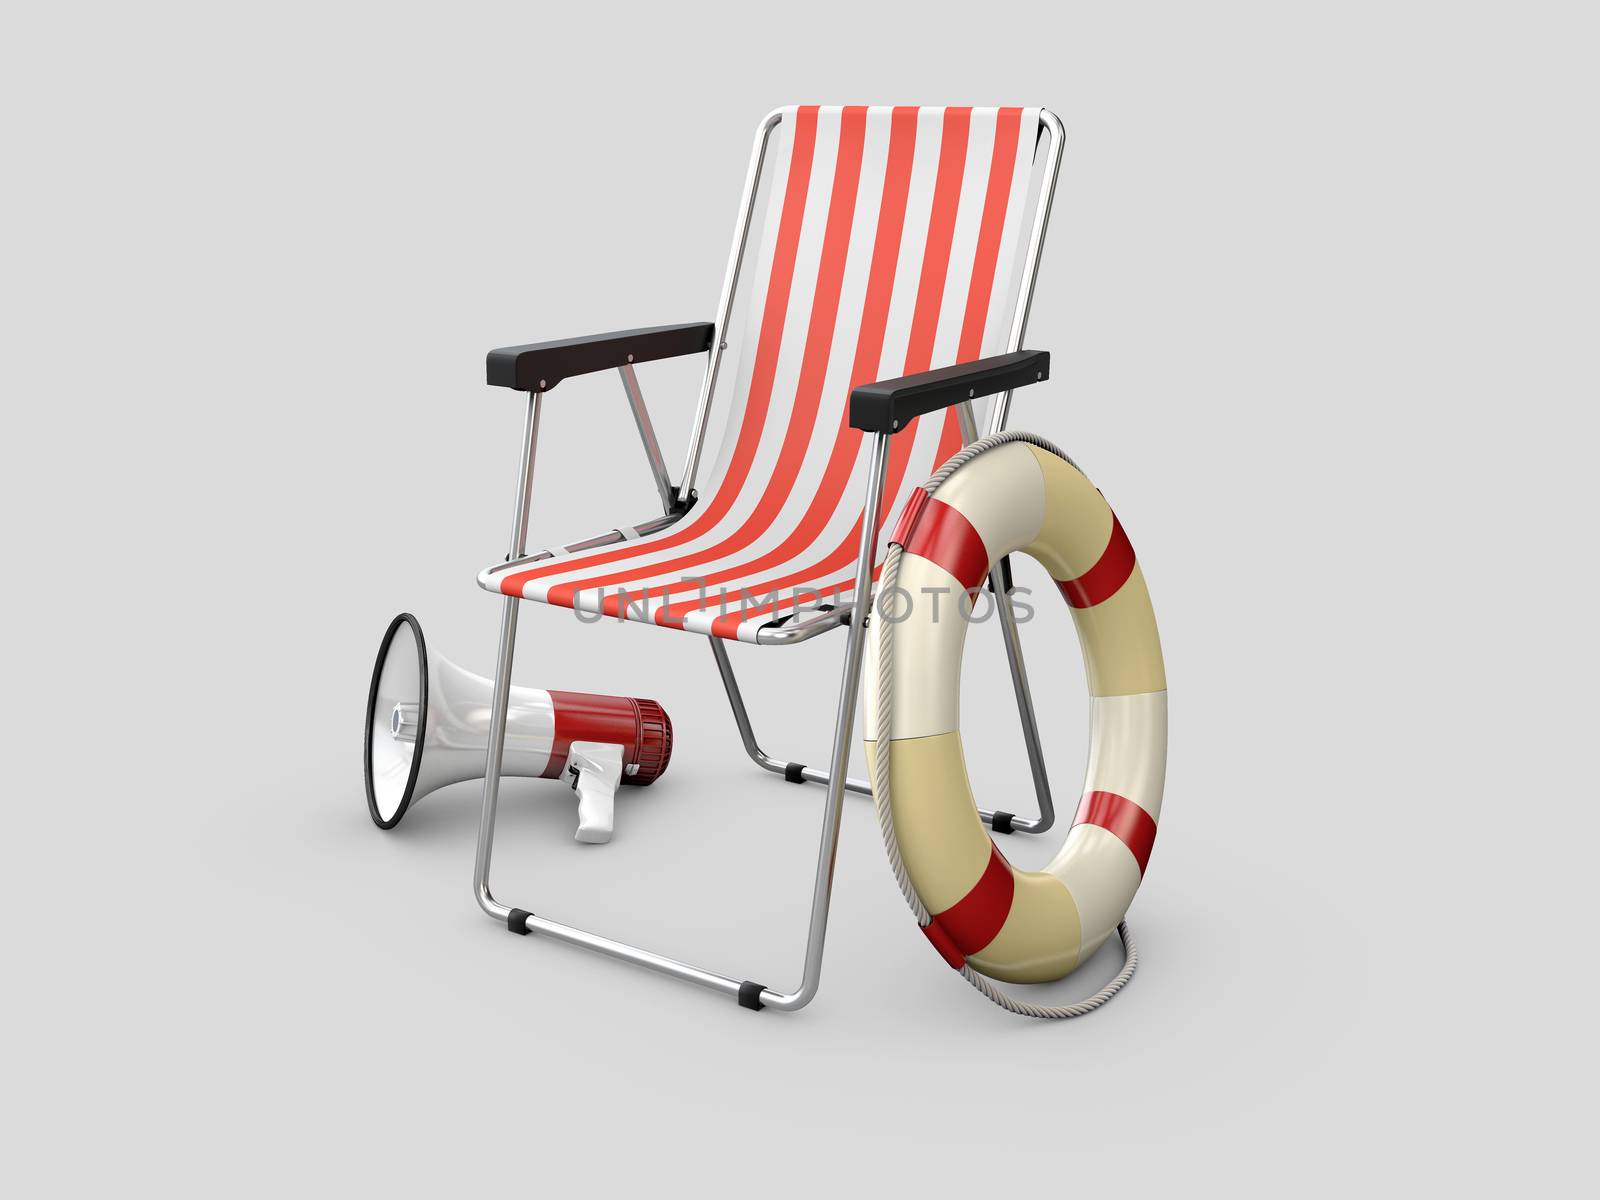 3d Illustration of Lifeguard chair with Lifebuoy and megaphone,isolated on gray background by tussik